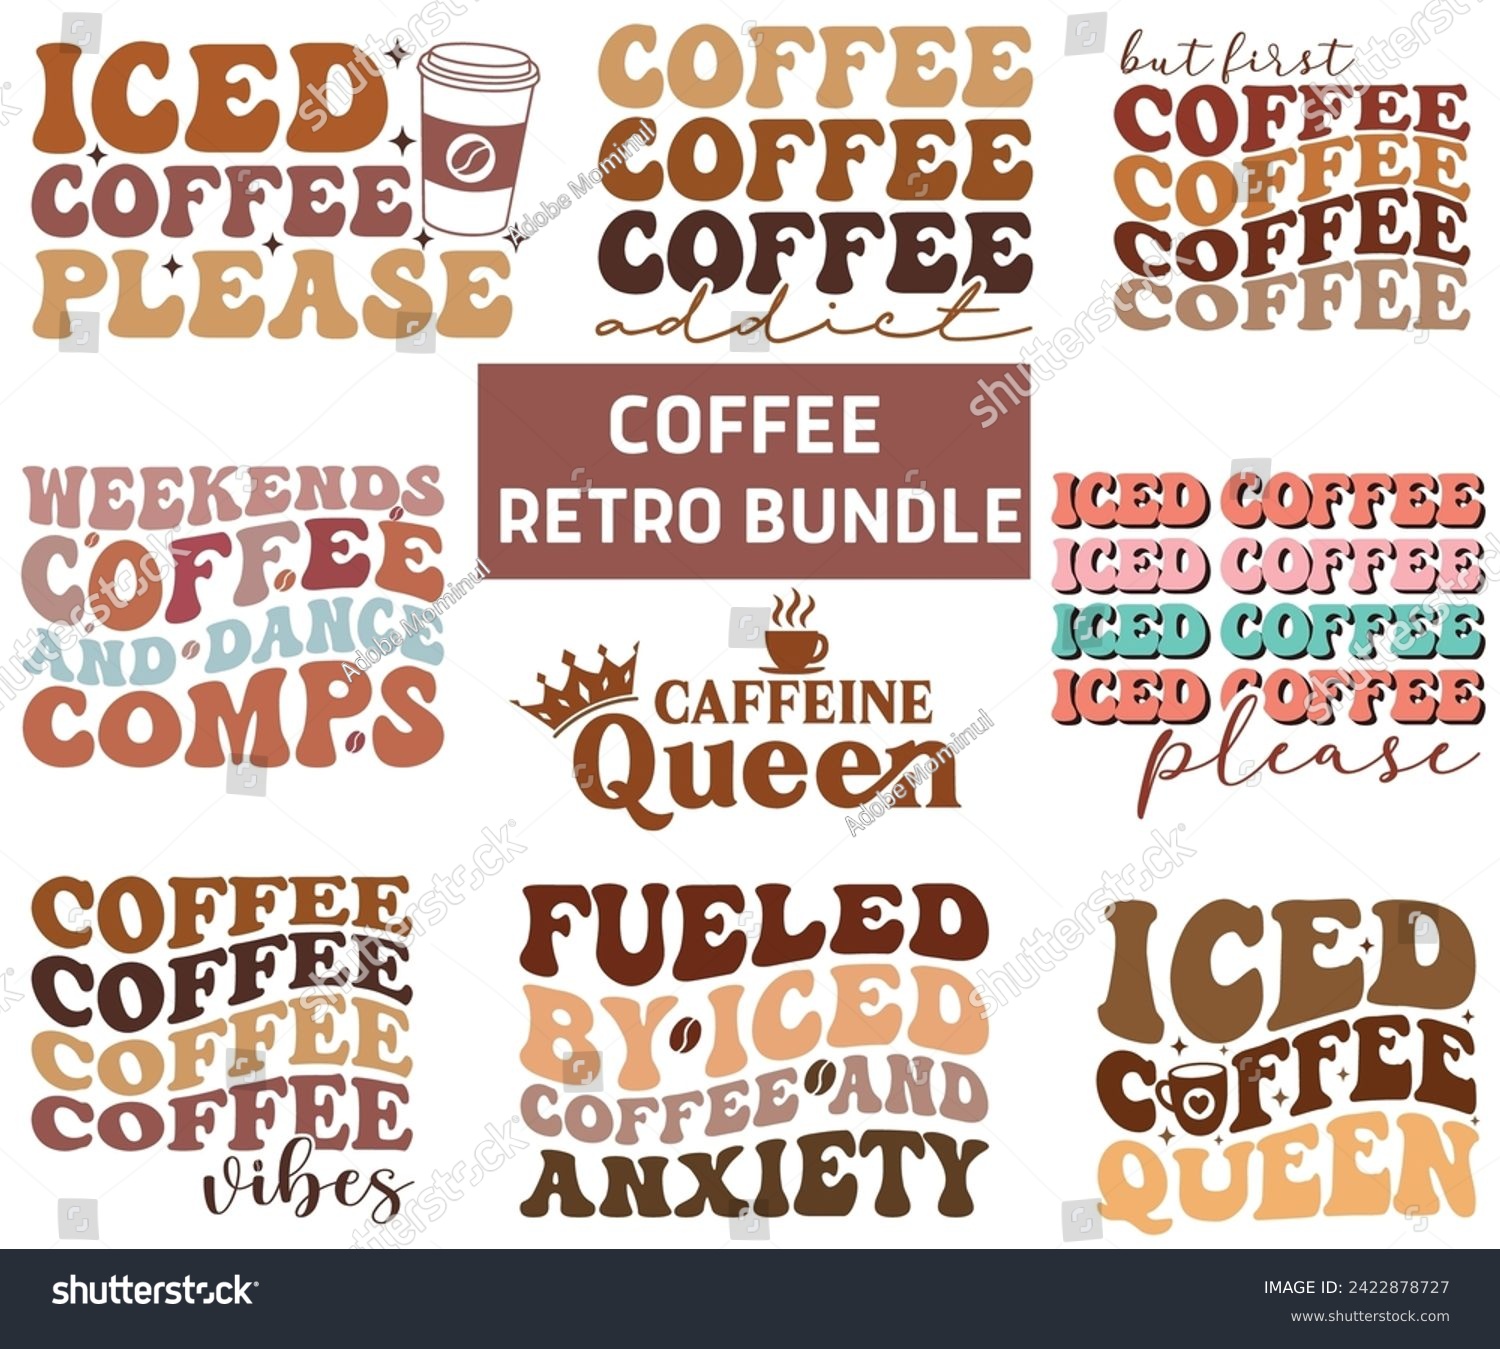 SVG of Coffee Retro Bundle Design,Coffee Svg,Coffee Retro,Coffee Mug Svg,Coffee Cup Svg,Funny Coffee Sayings,Caffeine Svg,Coffee Lover,Svg Cut File,Sublimation DesignCommercial Use svg